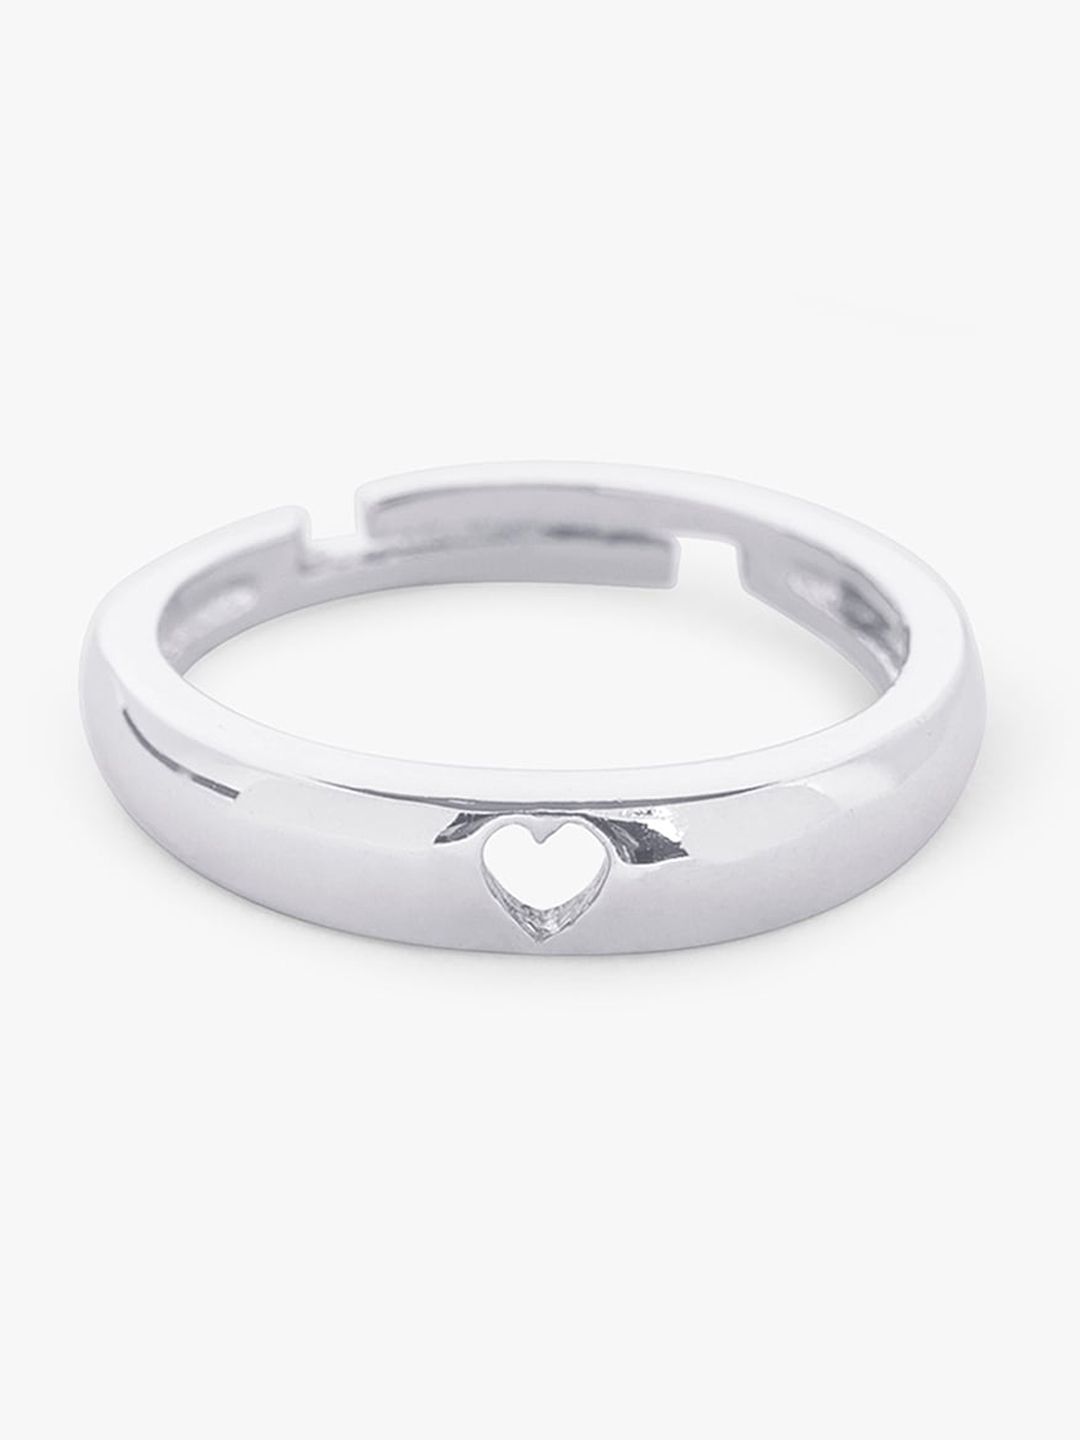 Mikoto by FableStreet Rhodium-Plated Silver-Toned Heart-Shaped Finger Ring Price in India